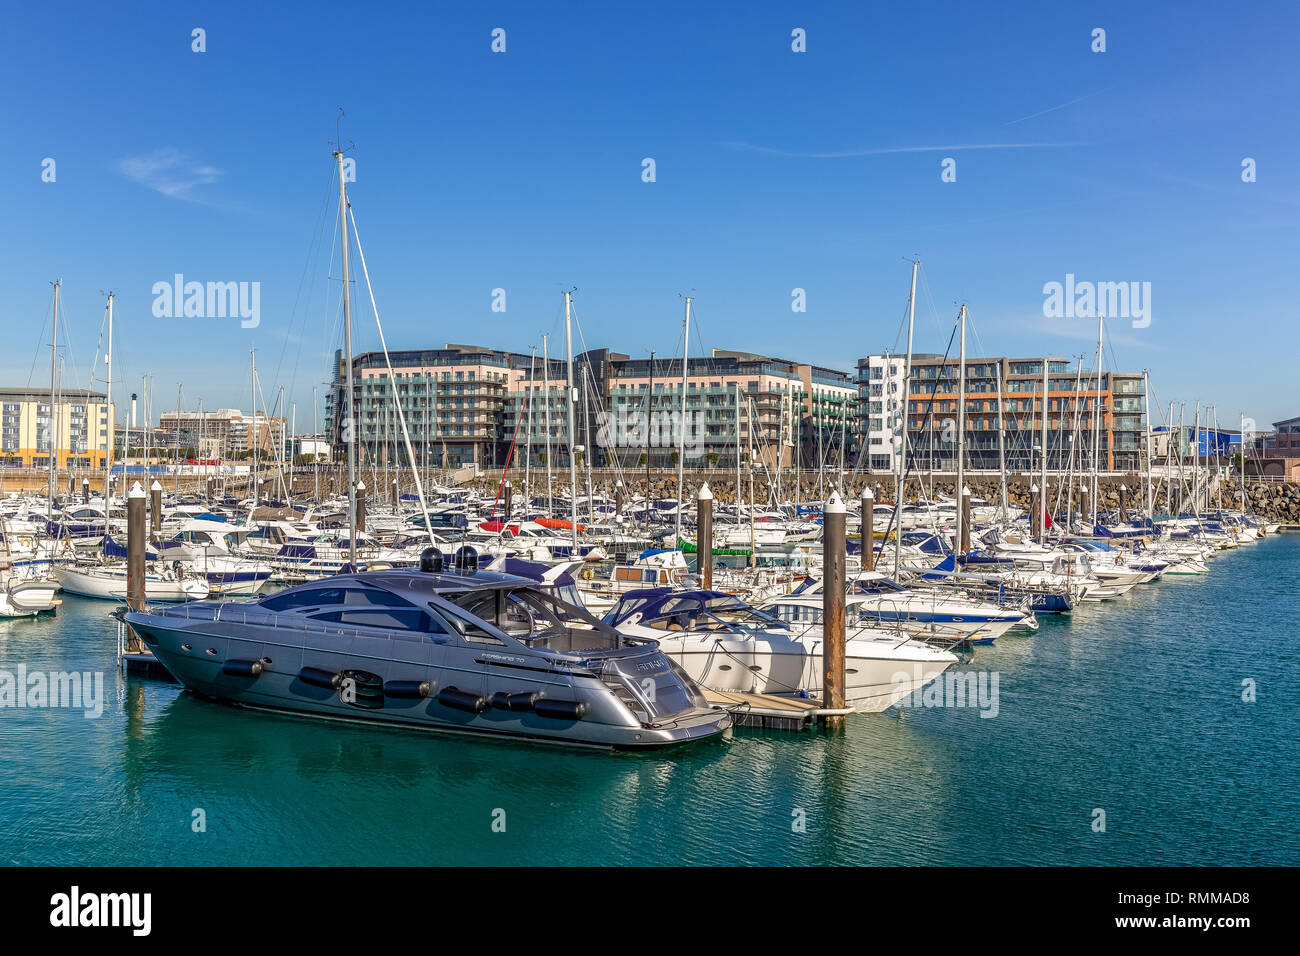 Castle Quay in Saint Helier on the Jersey on the Channel Islands. Shows many luxury boats moored up under a blue summer sky. Stock Photo